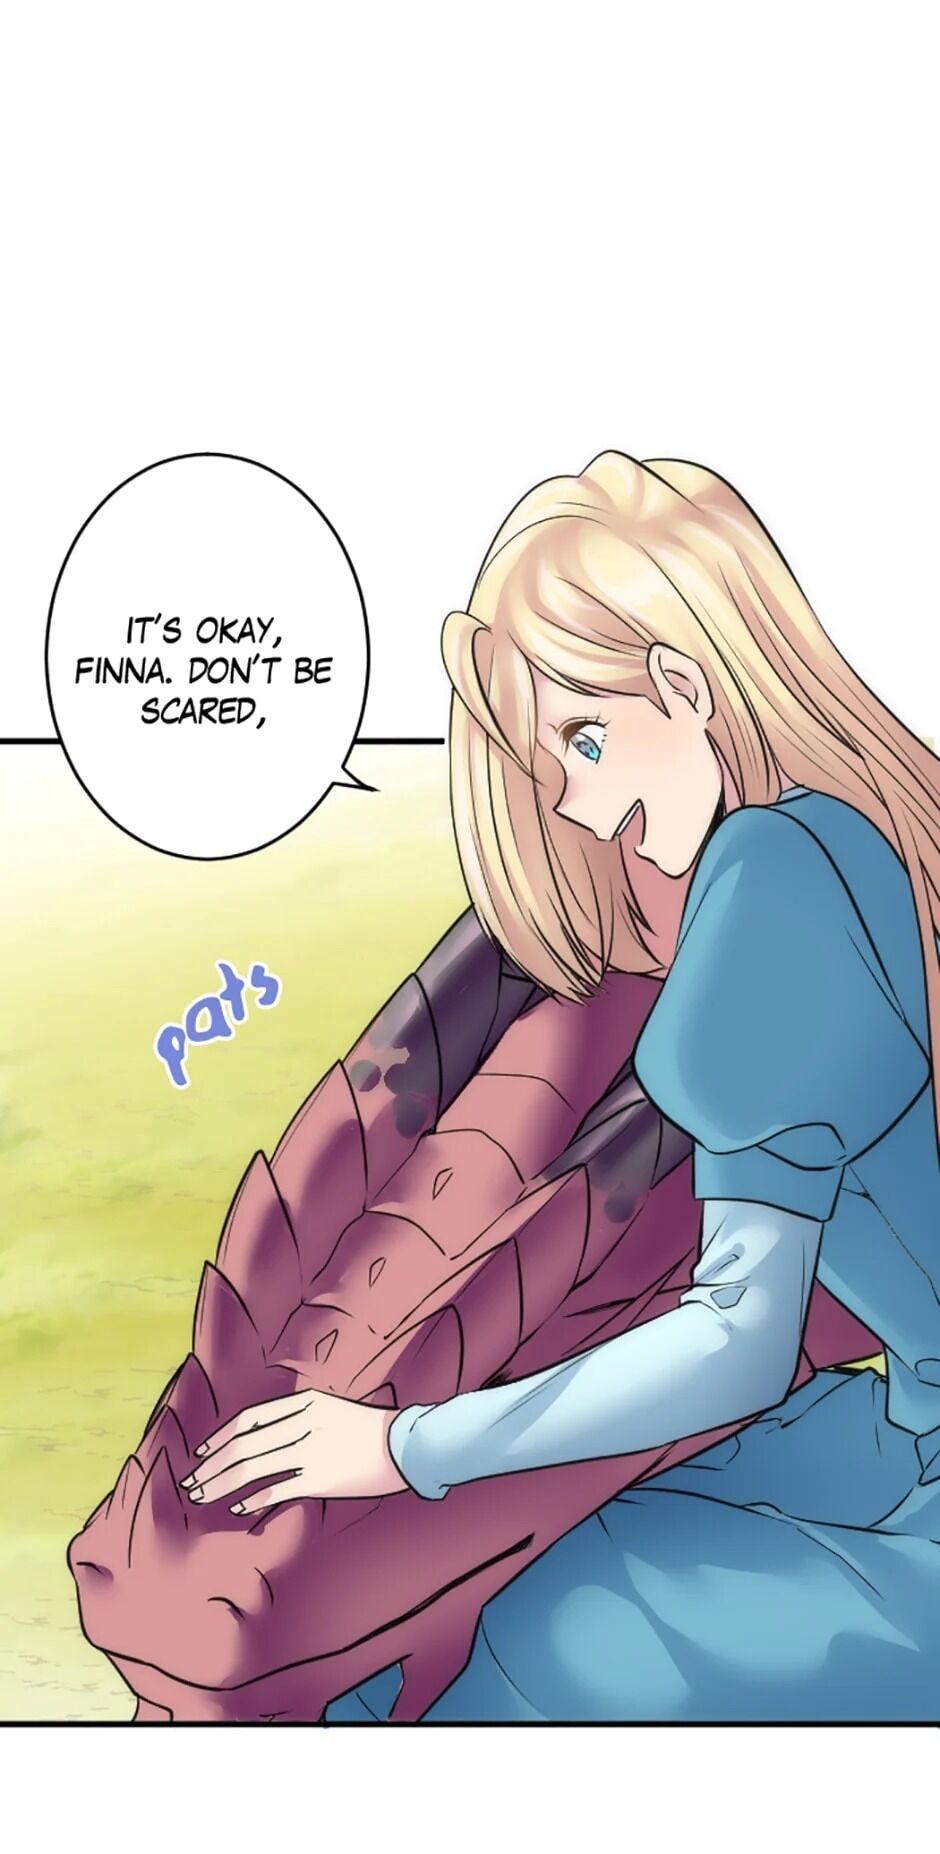 The Dragon Prince’s Bride chapter 43